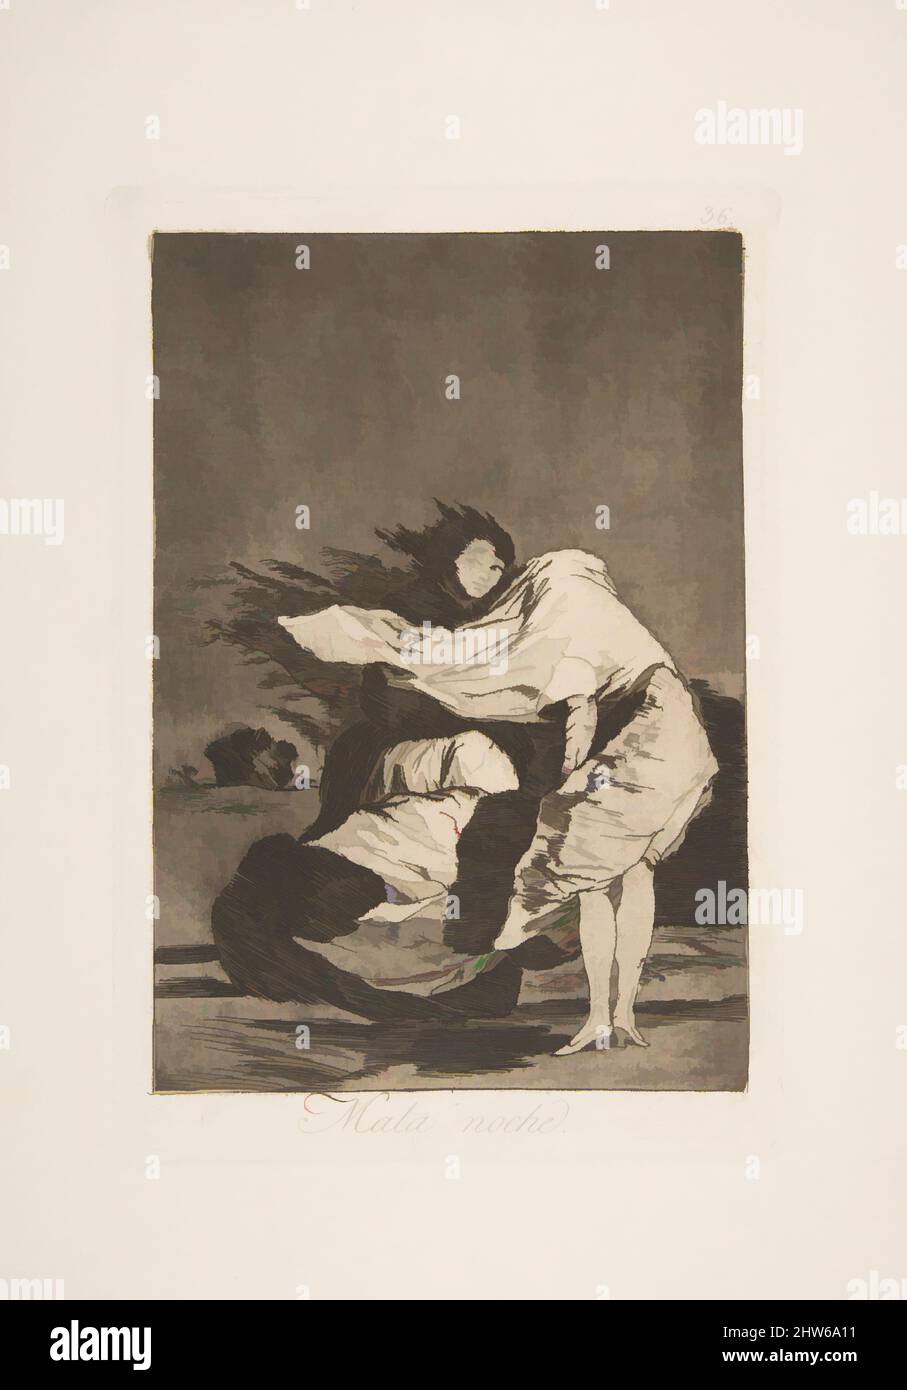 Art inspired by Plate 36 from 'Los Caprichos: A bad night (Mala noche.), 1881–86, Etching and burnished aquatint, Plate: 8 7/16 x 6 in. (21.5 x 15.2 cm), Prints, Goya (Francisco de Goya y Lucientes) (Spanish, Fuendetodos 1746–1828 Bordeaux, Classic works modernized by Artotop with a splash of modernity. Shapes, color and value, eye-catching visual impact on art. Emotions through freedom of artworks in a contemporary way. A timeless message pursuing a wildly creative new direction. Artists turning to the digital medium and creating the Artotop NFT Stock Photo